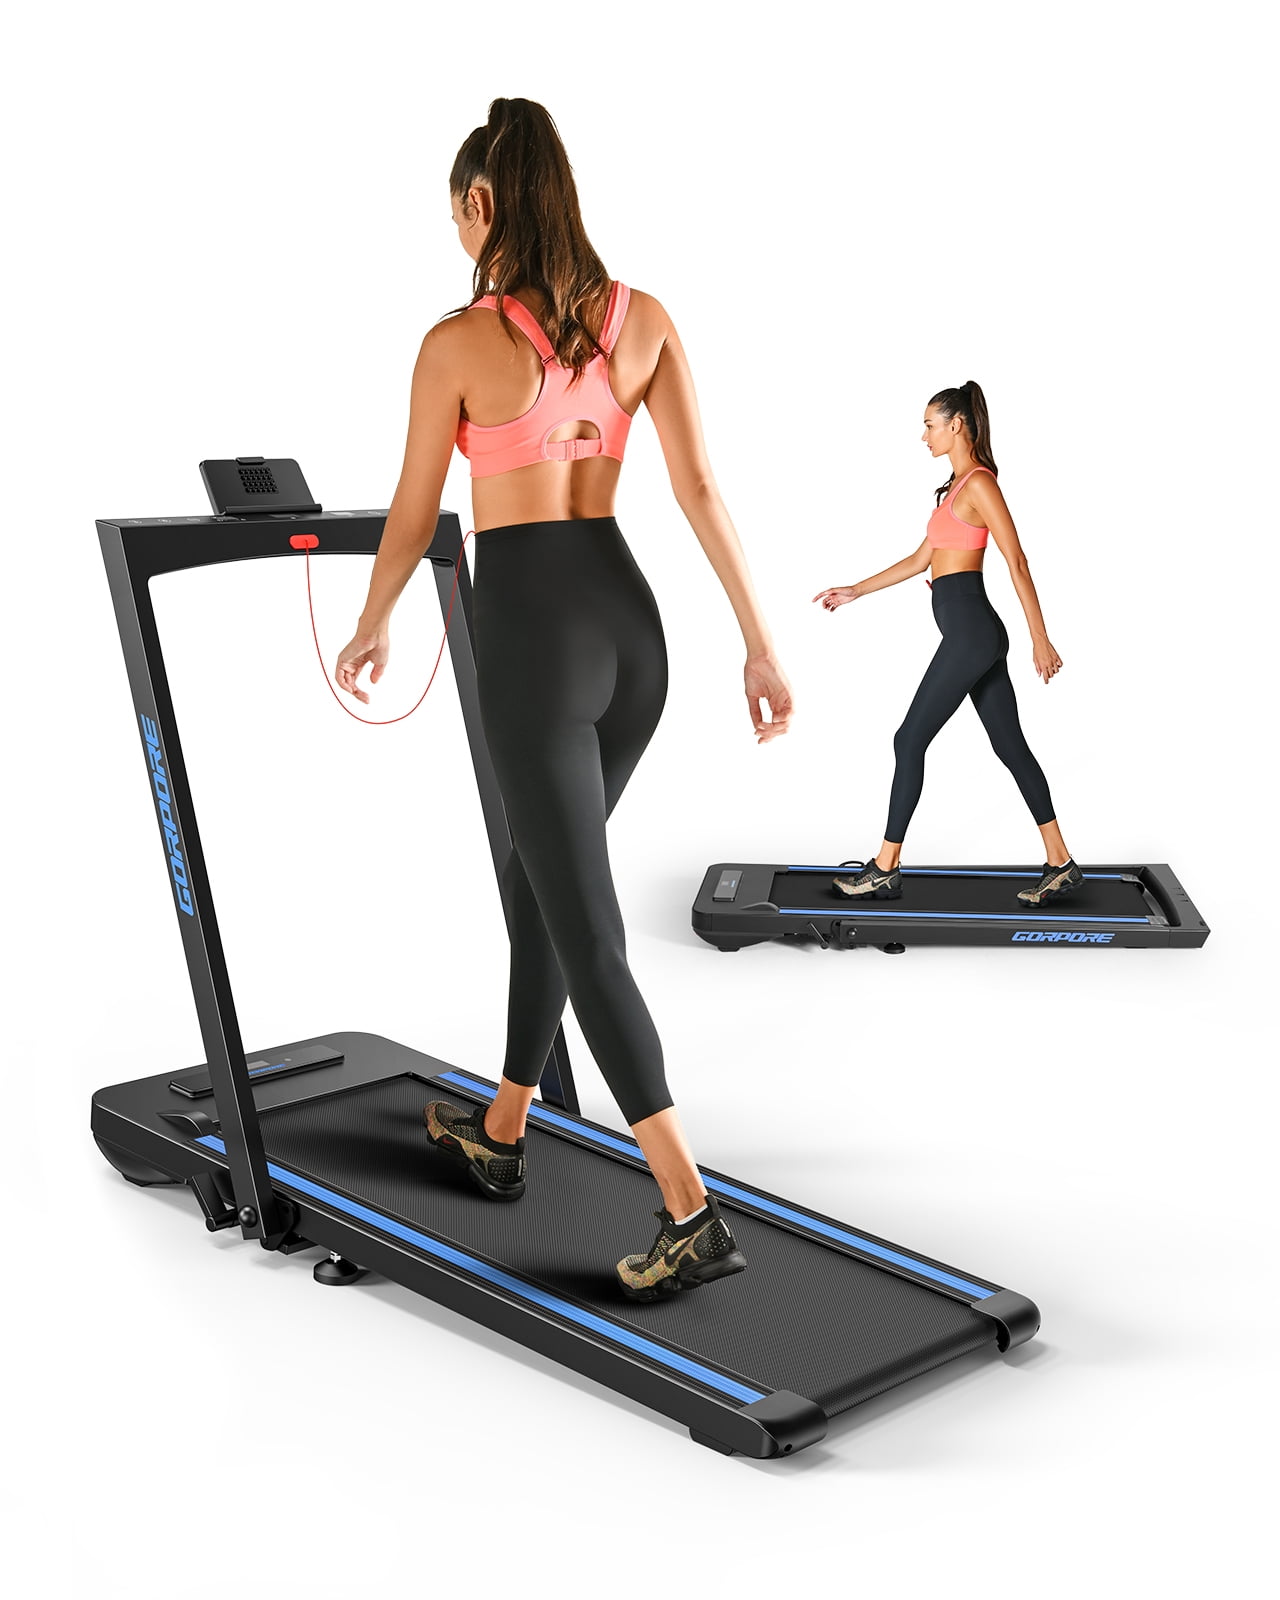 2.25HP Folding Electric Treadmills Bluetooth Speakers LCD Display Walking Jogging Machine for Home/Office Use Remote Control Goplus 3-in-1 Treadmill with Large Desk 